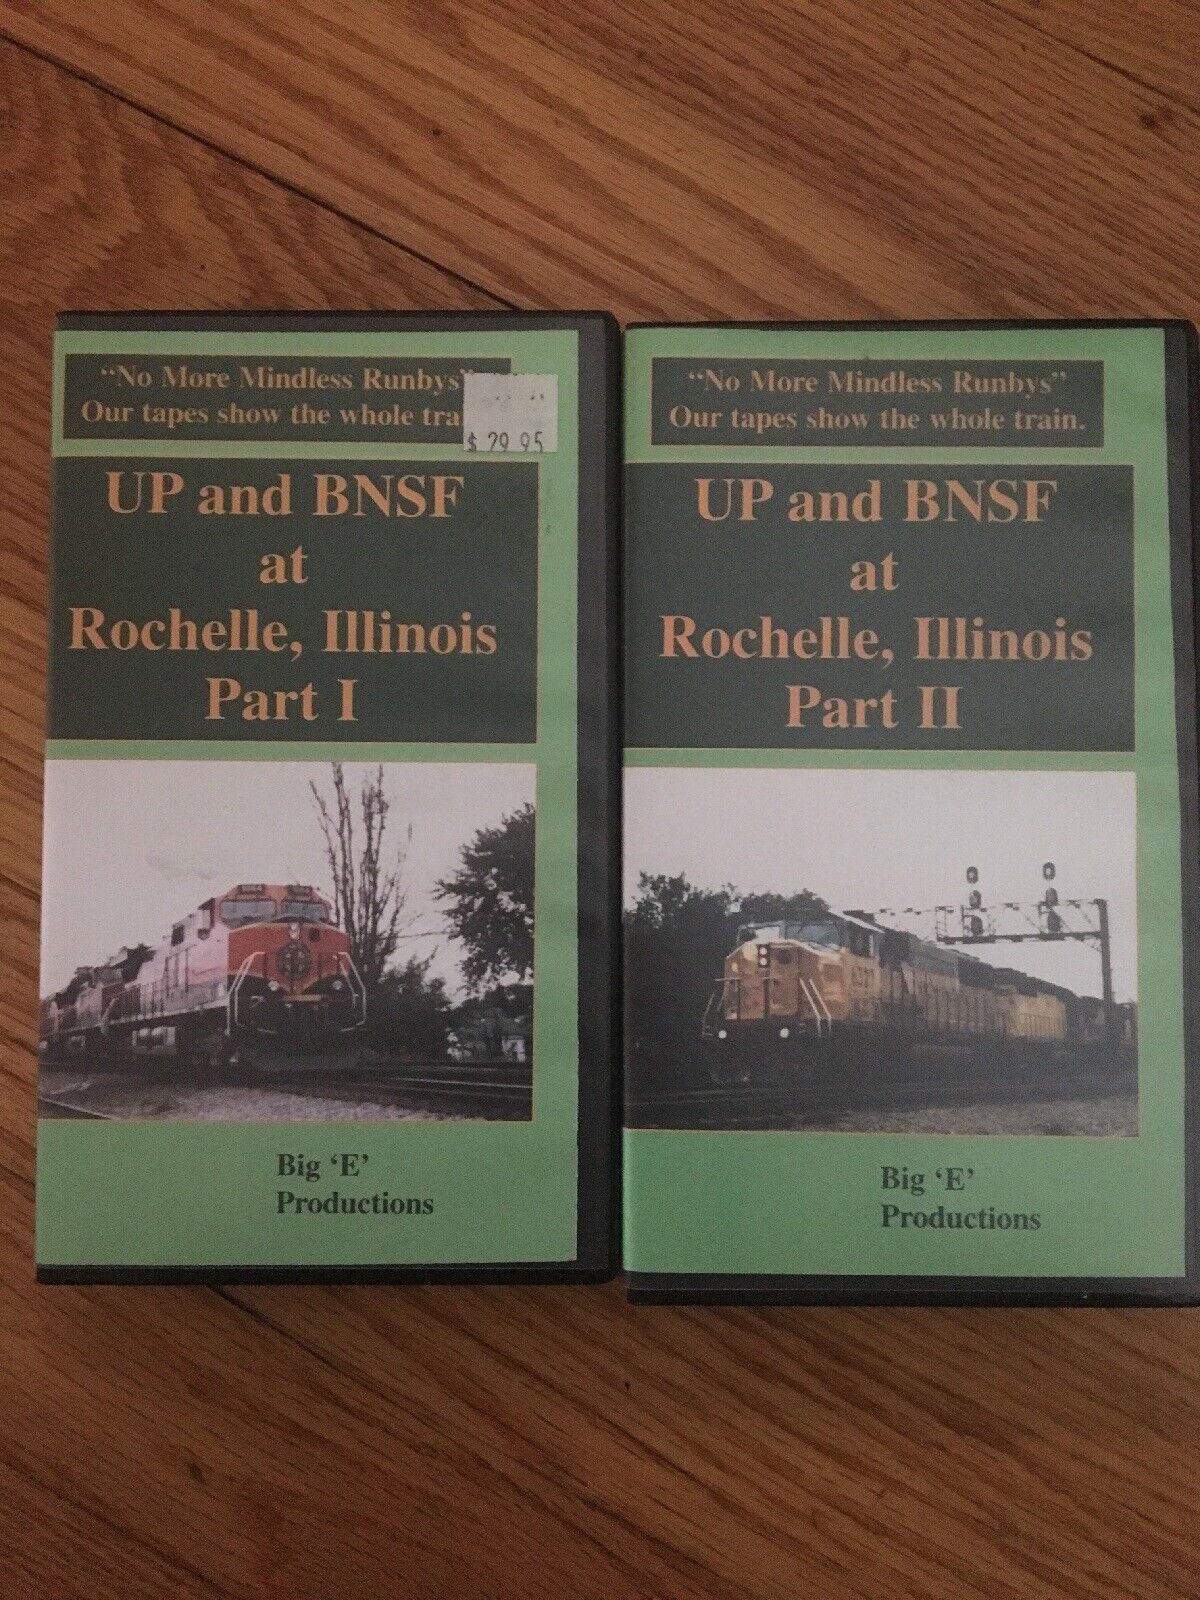 UP & BNSF At Rochelle Illinois Big E Productions VHS 1997 2 Tape Set